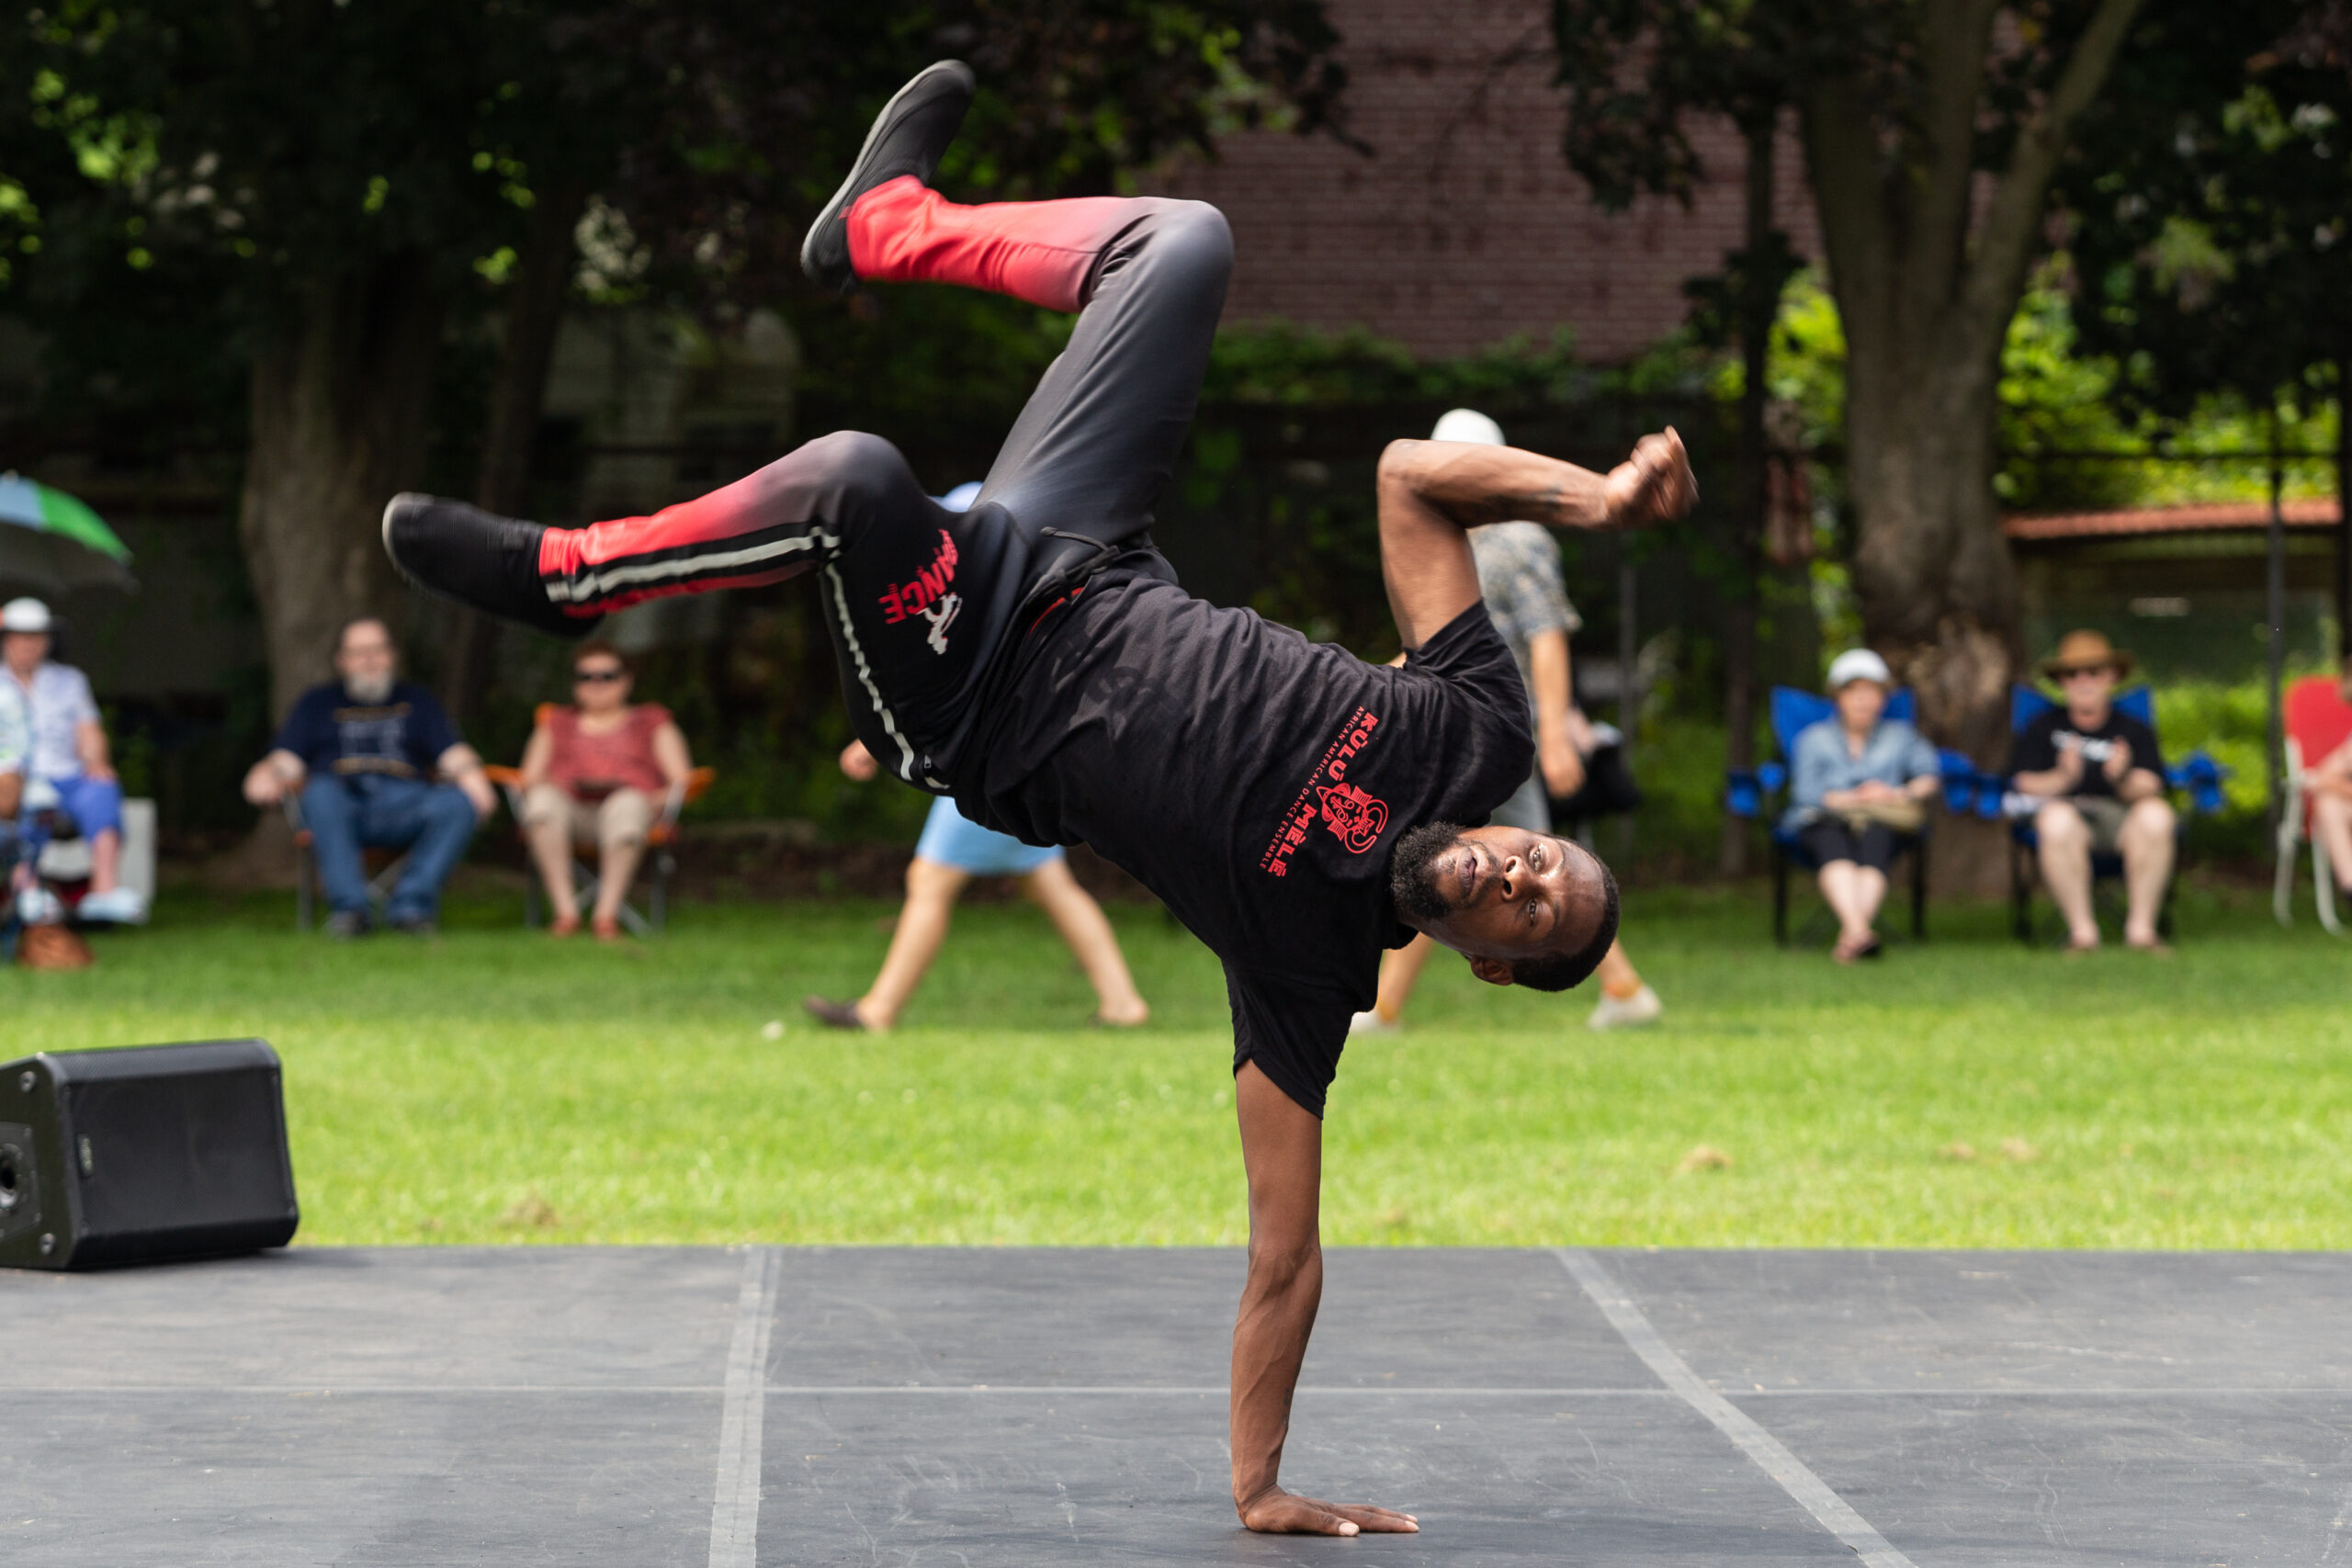 A dancer in a one-handed handstand with arms and legs bent. The dancer is on an outdoor stage and there are onlookers in the background.